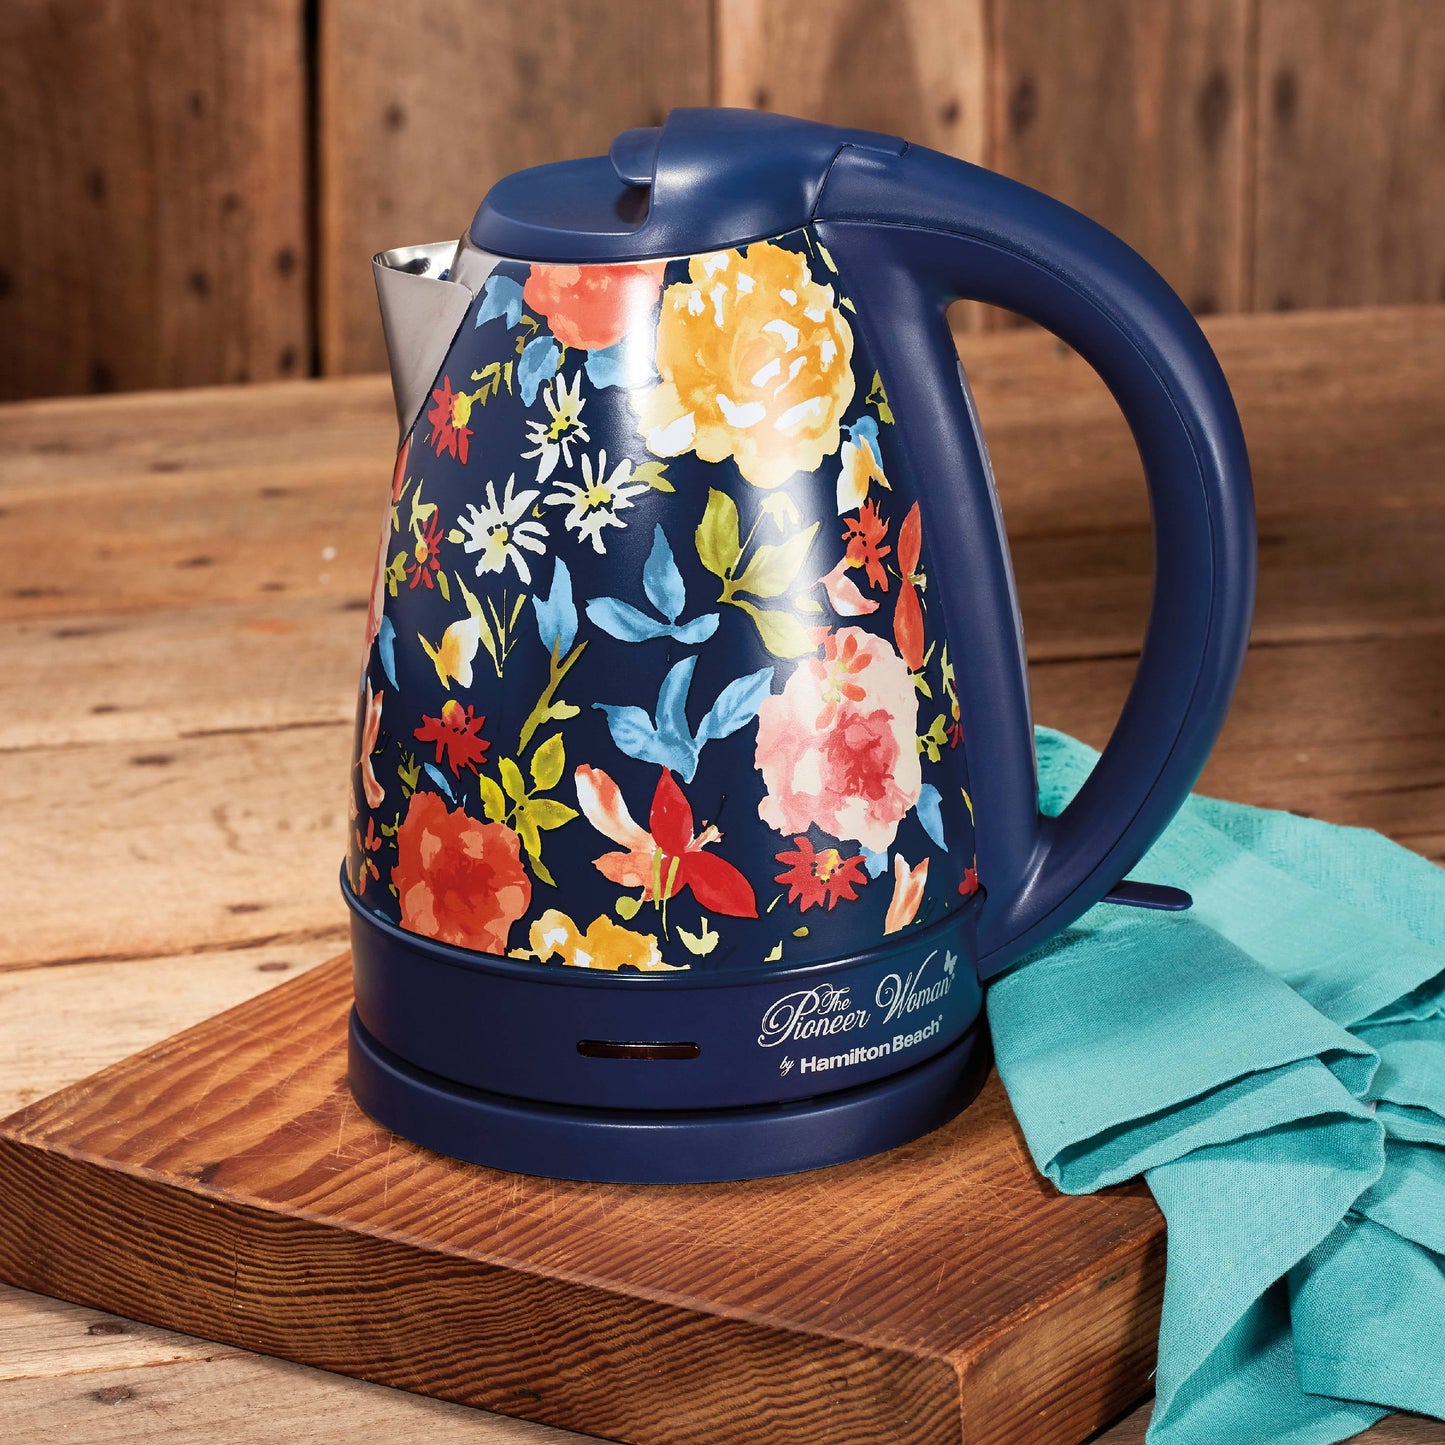 The Pioneer Woman Fiona Floral Blue, Electric Kettle, 1.7-Liter, Model 40971